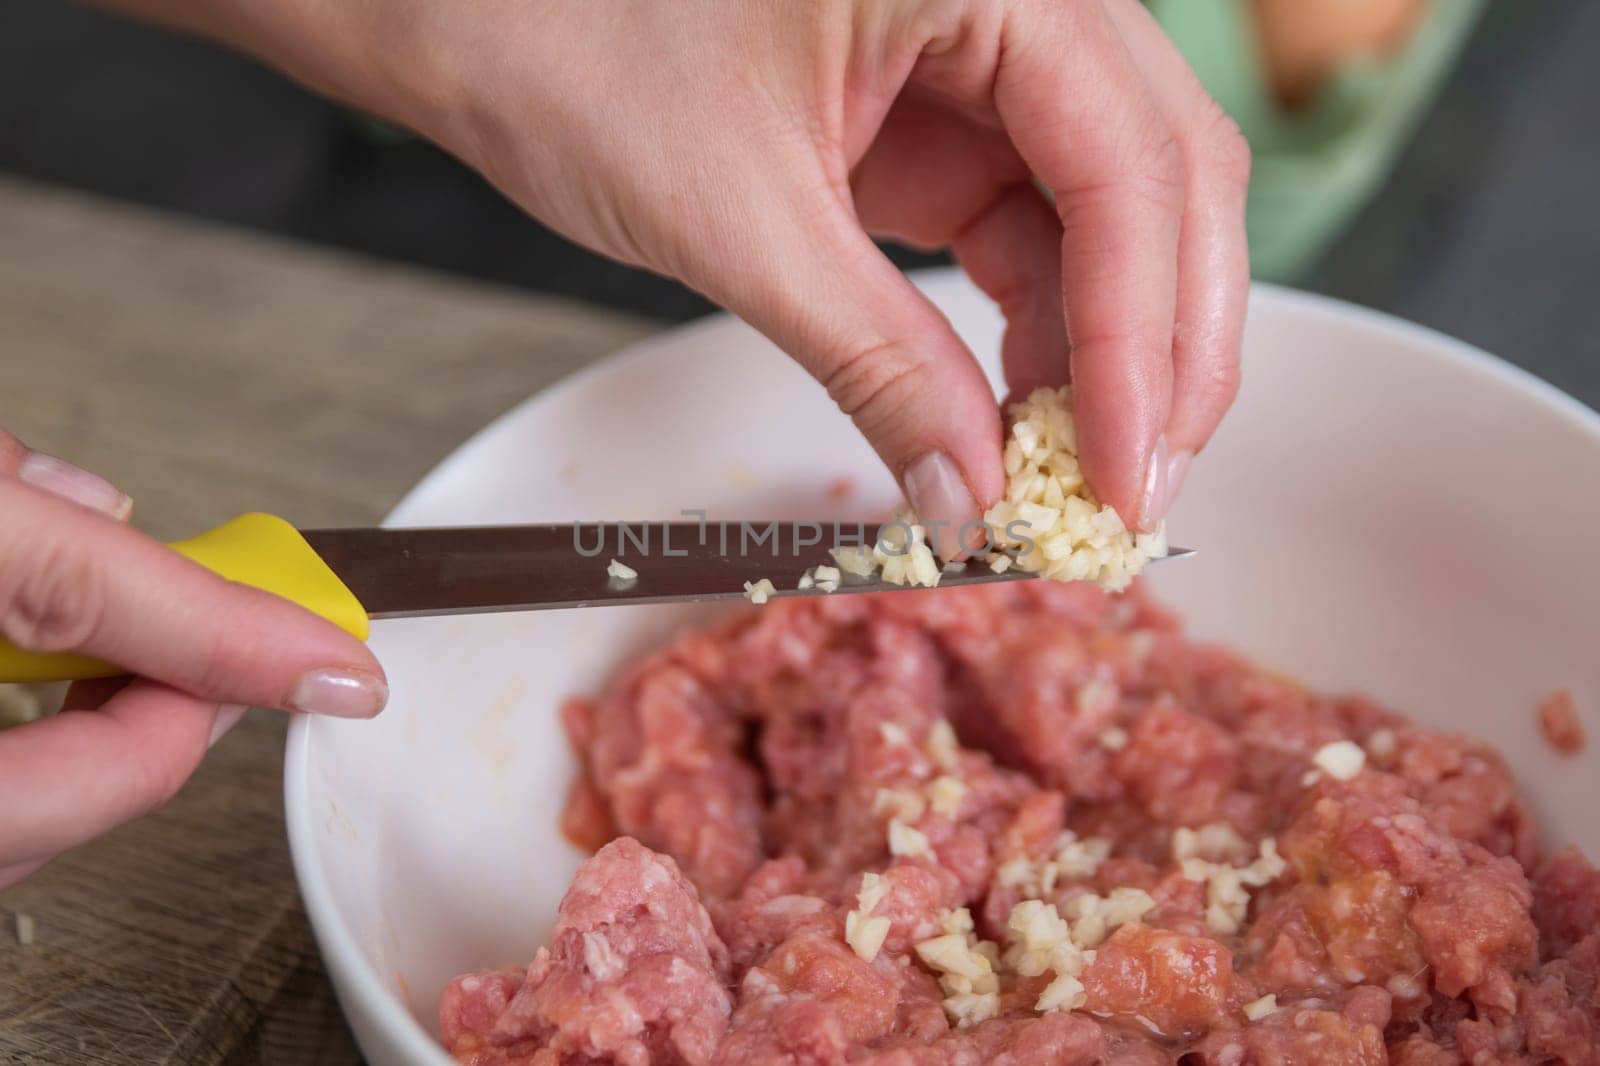 A woman's hand sprinkles finely chopped garlic into a raw chopped meat, close-up. Fresh garlic, diced, is used as a raw meat dressing